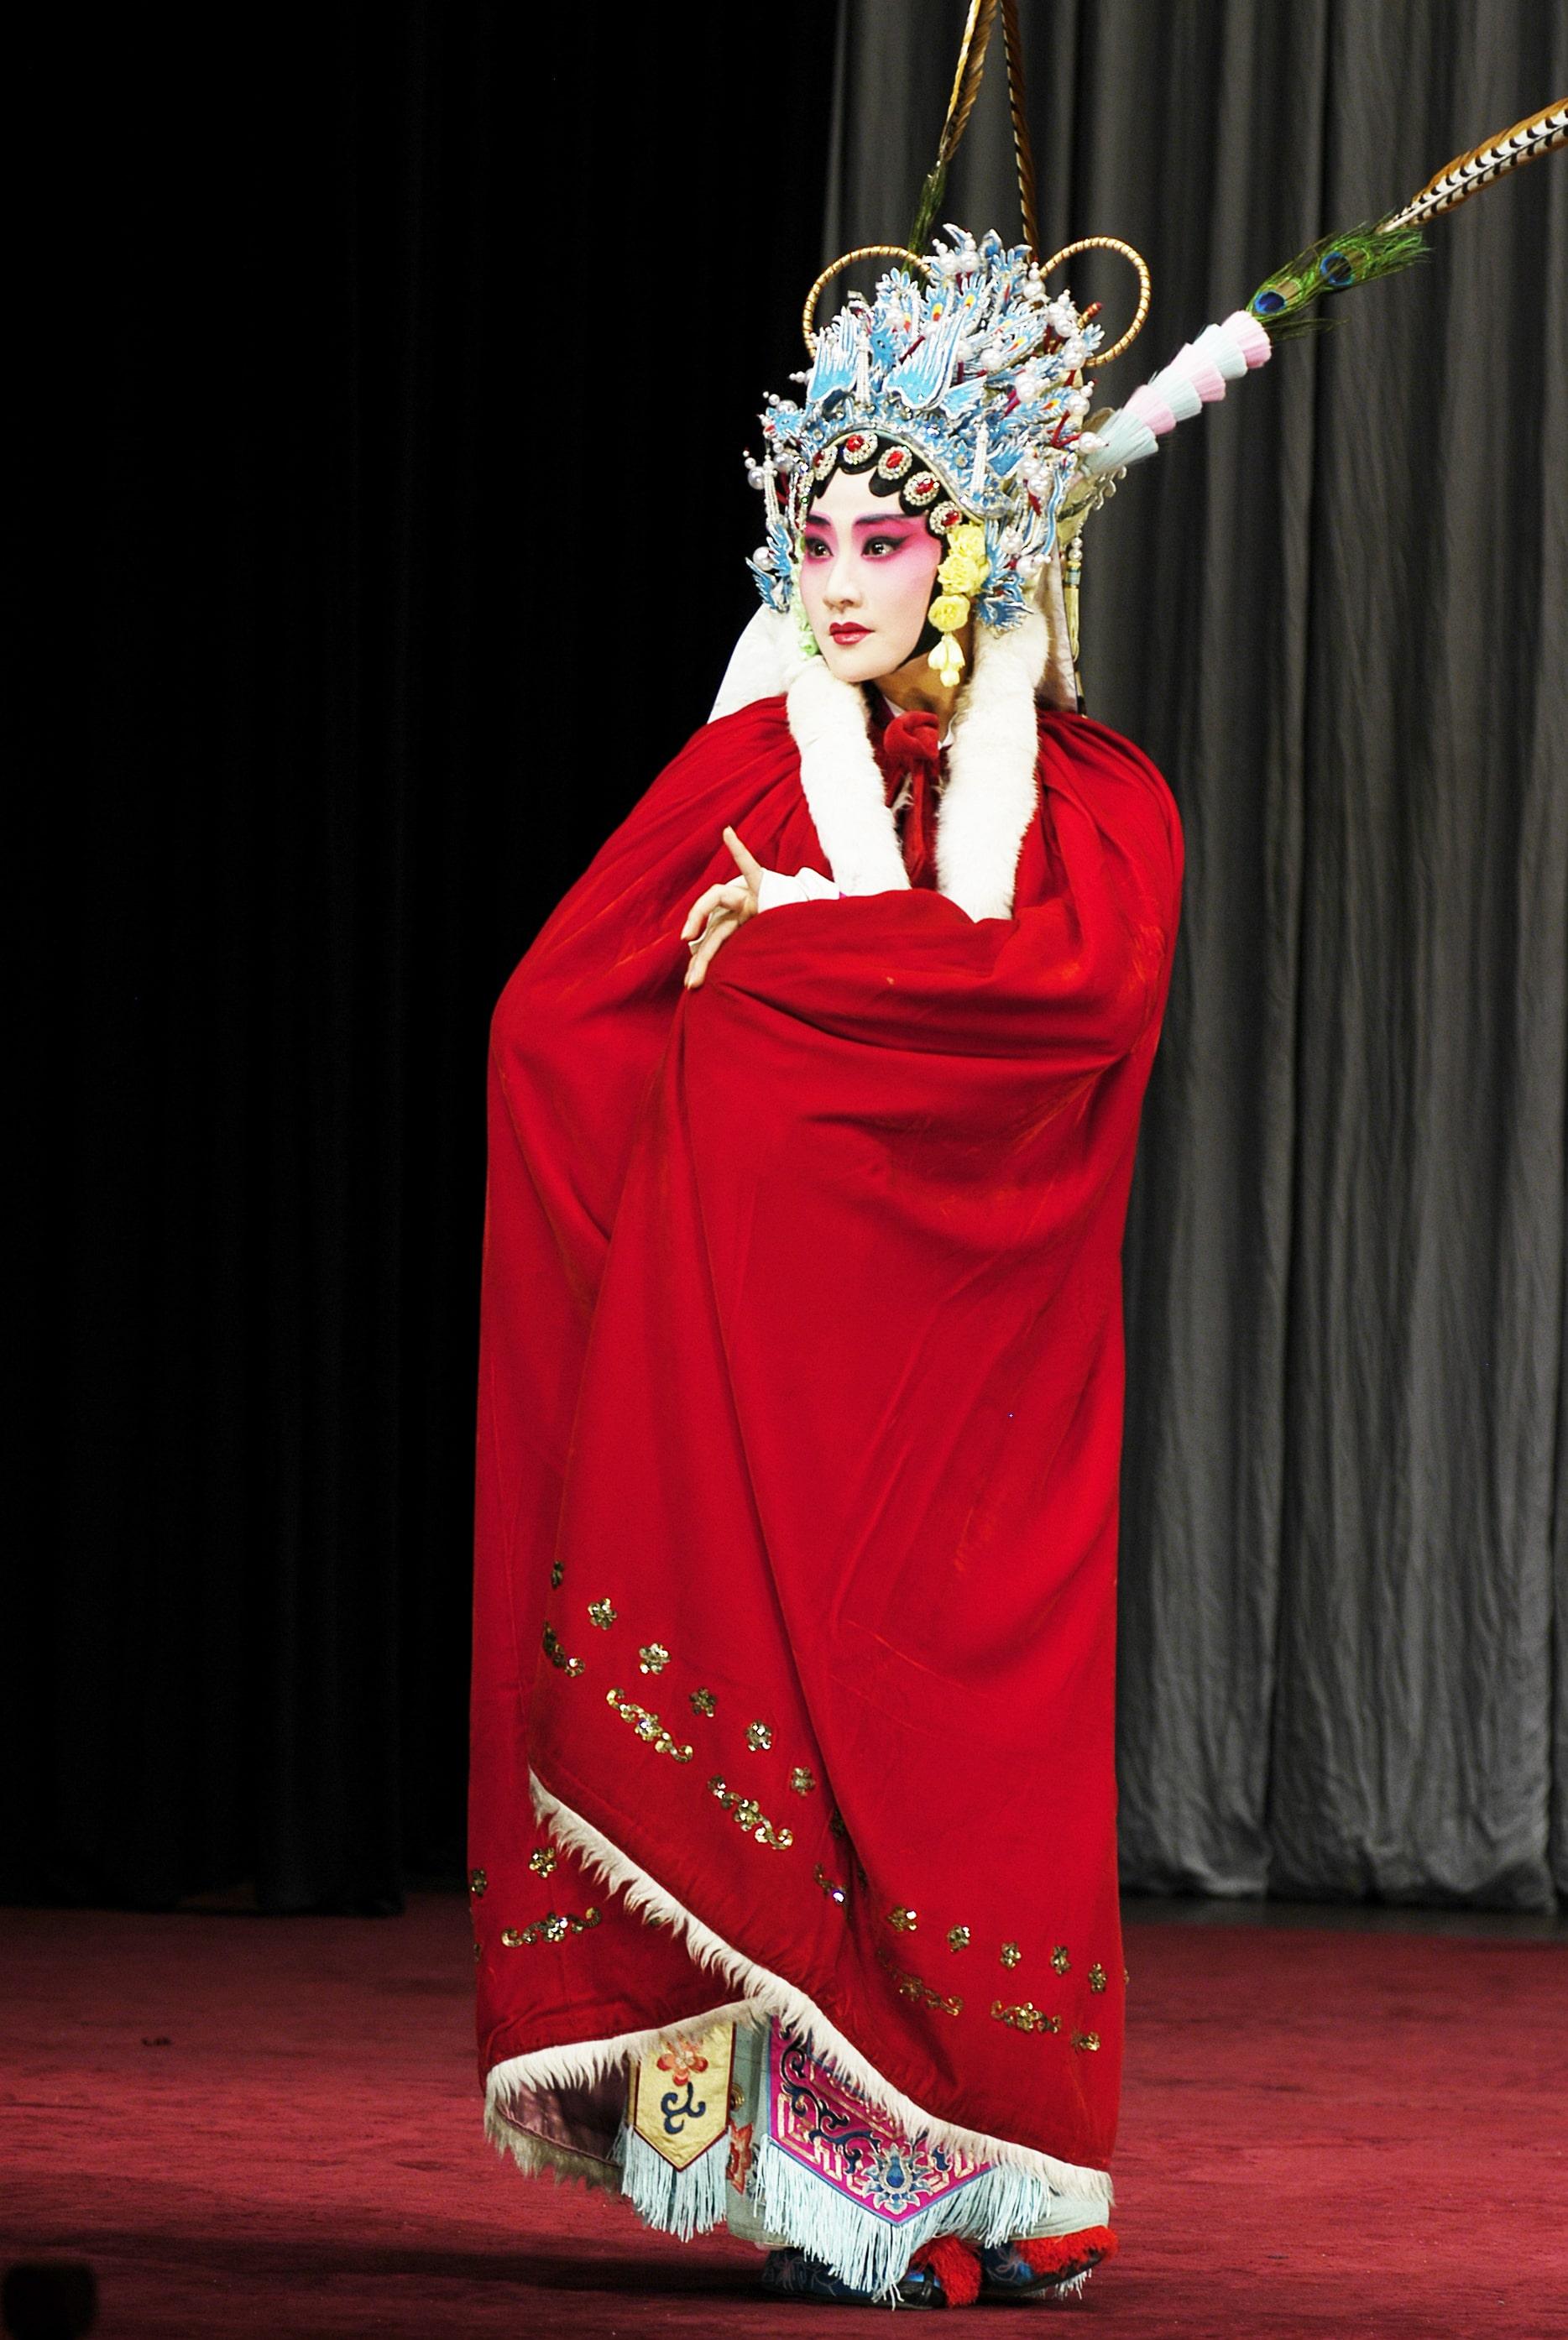 The inaugural Chinese Culture Festival will stage three classic Northern Kunqu opera plays in July. Photo shows a scene from the performance "Lady Zhaojun Going beyond the Great Wall" from "The Tomb of Wang Zhaojun".
